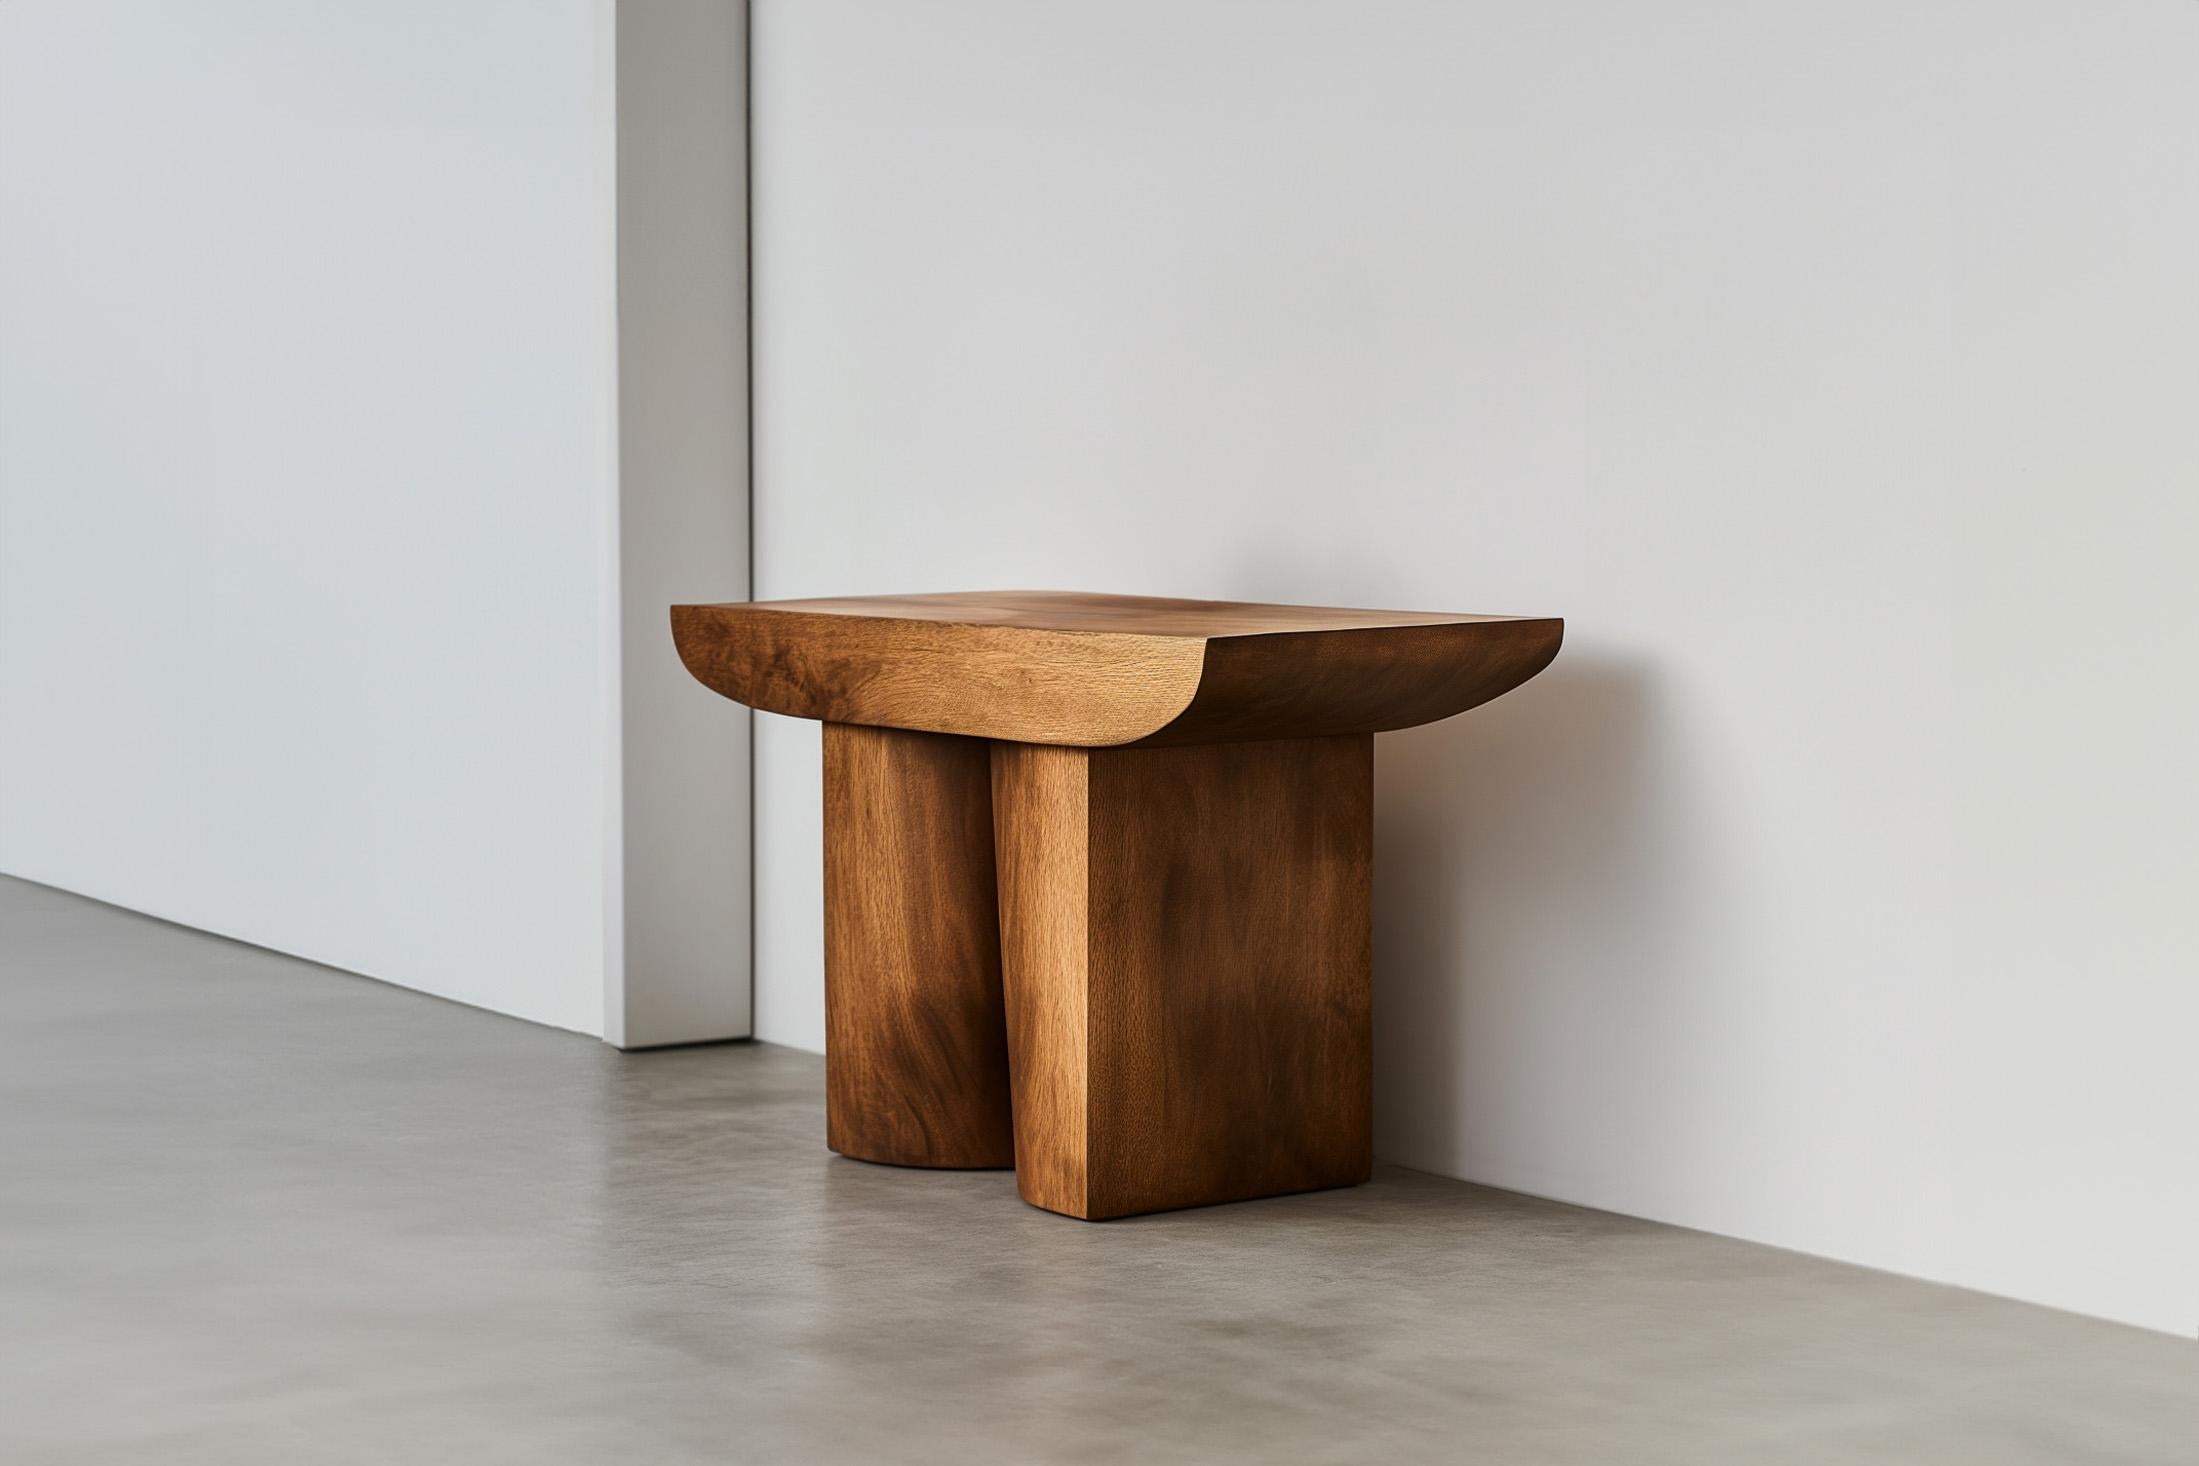 Elefante Tapered Leg Console 16 by NONO, Oak Craft, Stout Silhouette

—————————————————————
Elefante Collection: A Harmony of Design and Heritage by NONO

Crafting Elegance with a Modernist Touch

NONO, renowned for its decade-long journey in